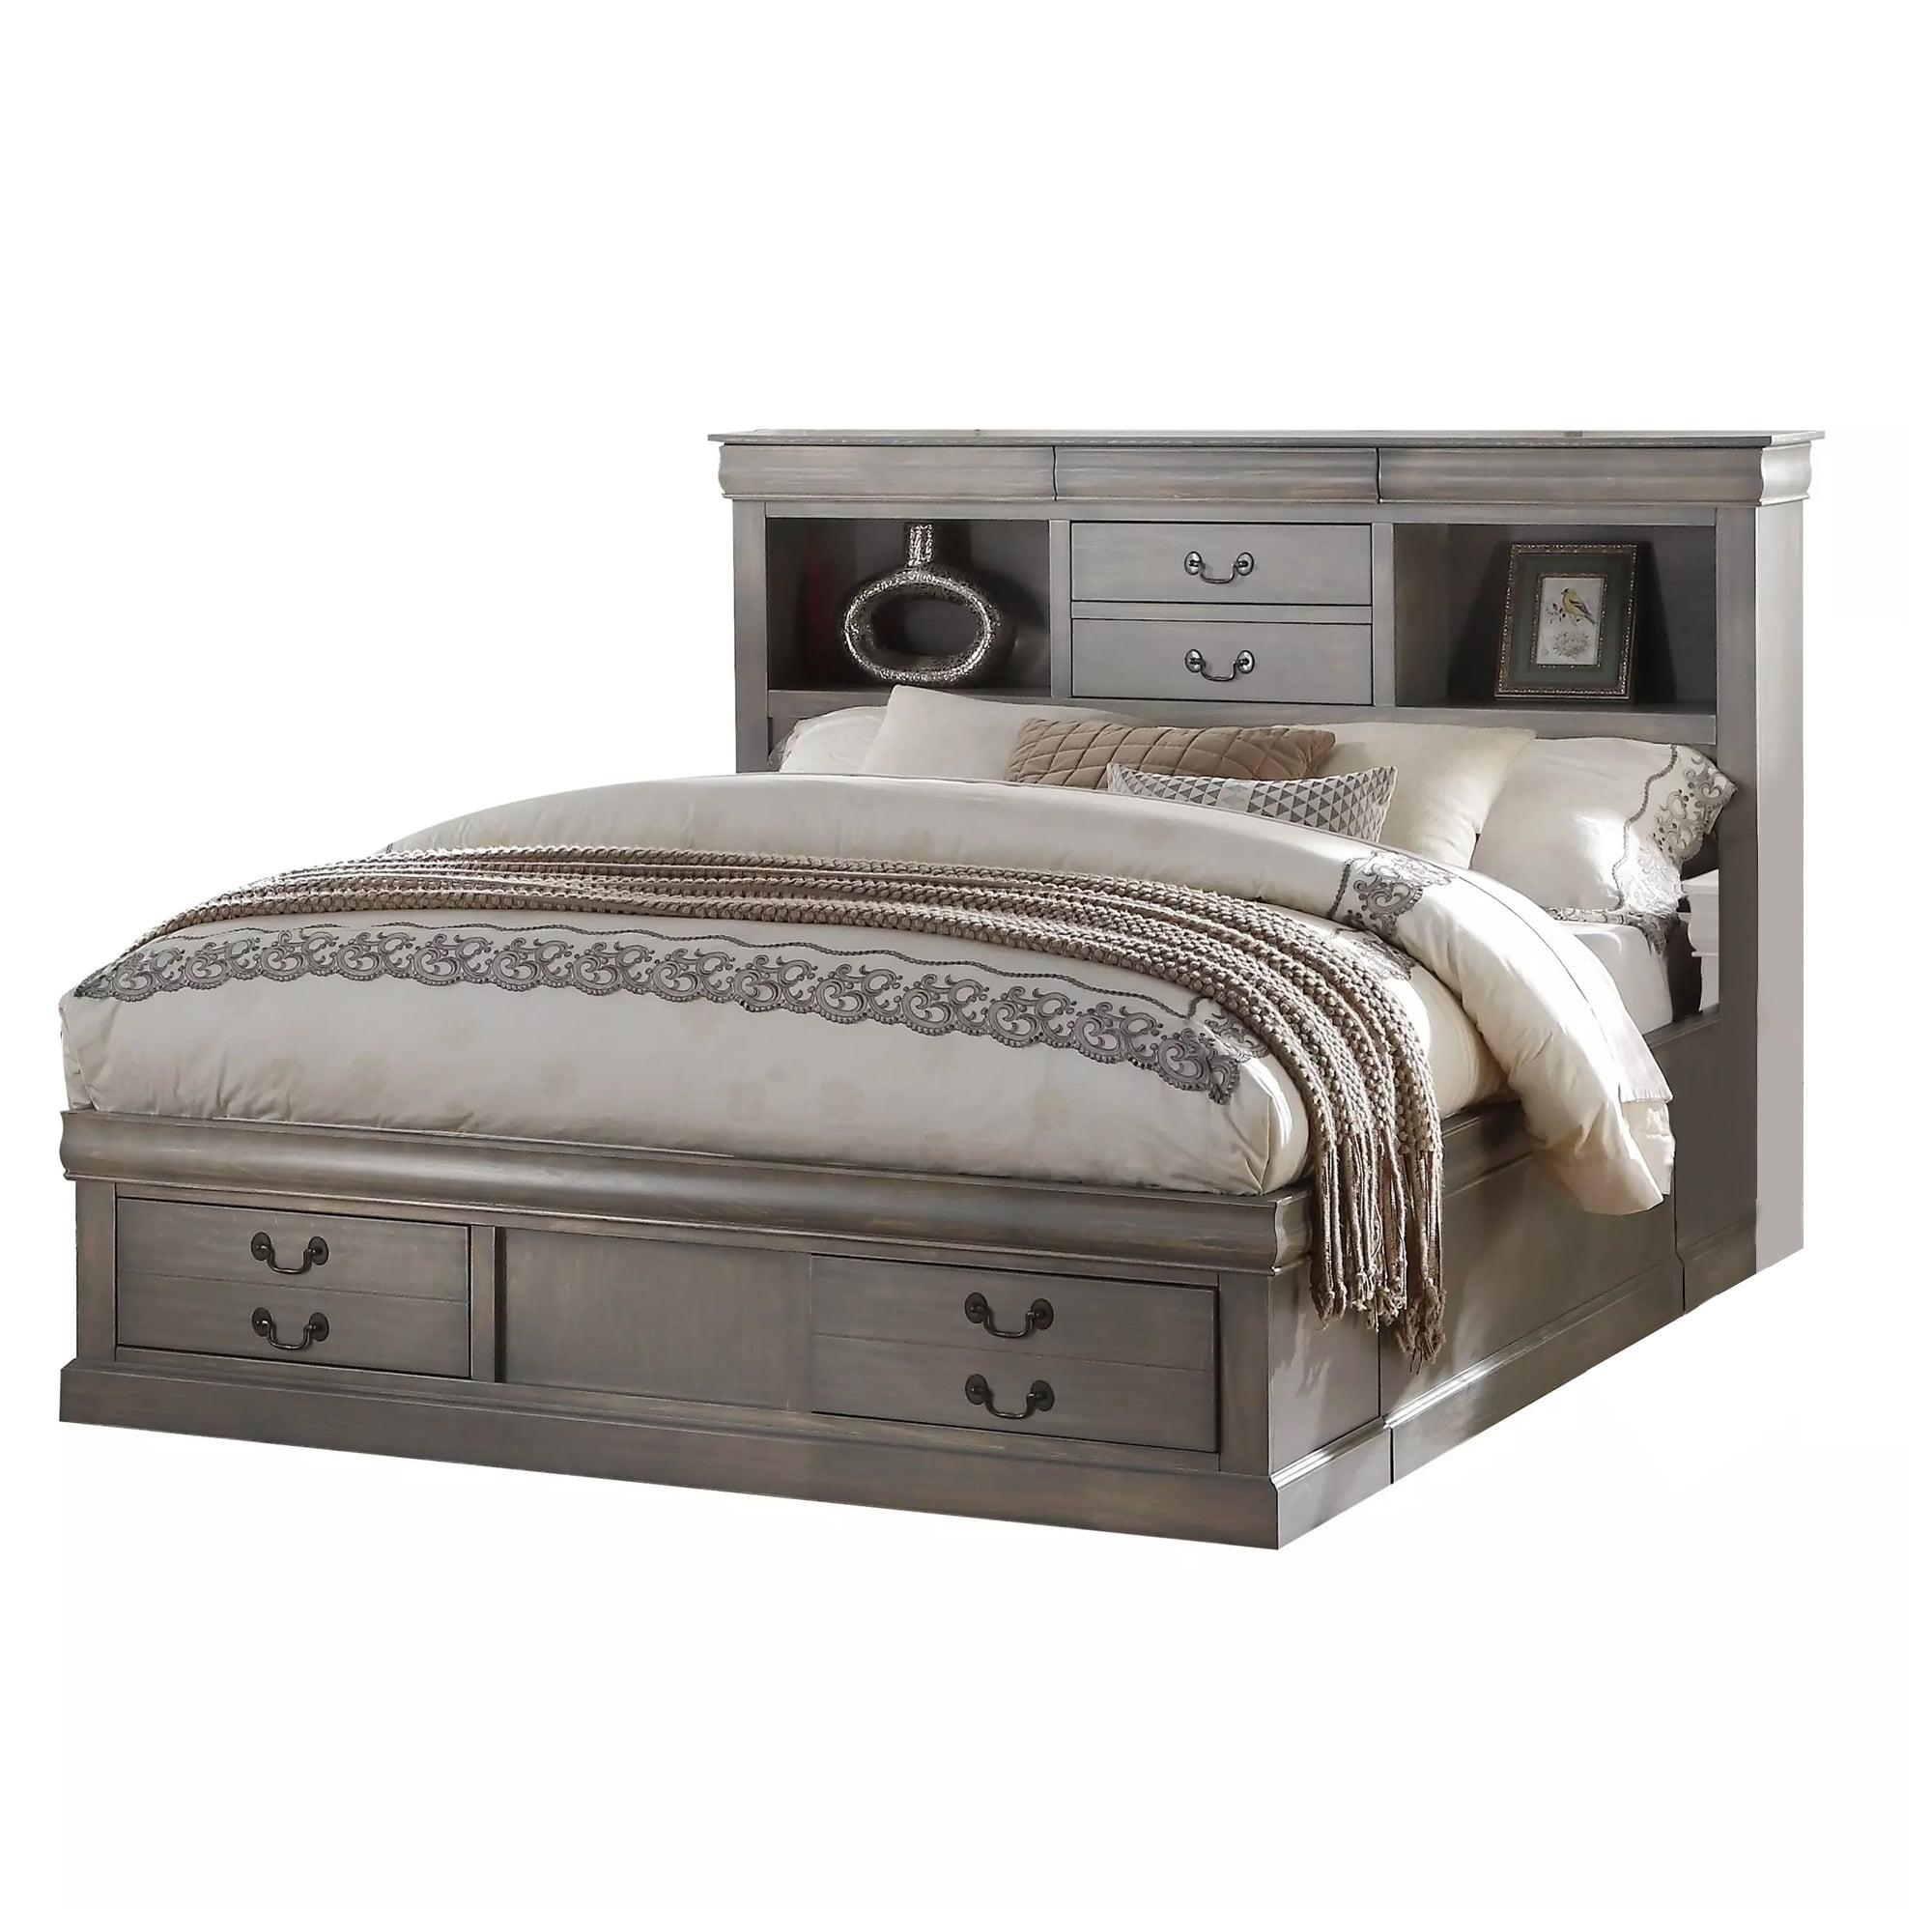 Wooden Queen Size Bed with 4 Drawers and 2 Open Shelves Storage, Gray